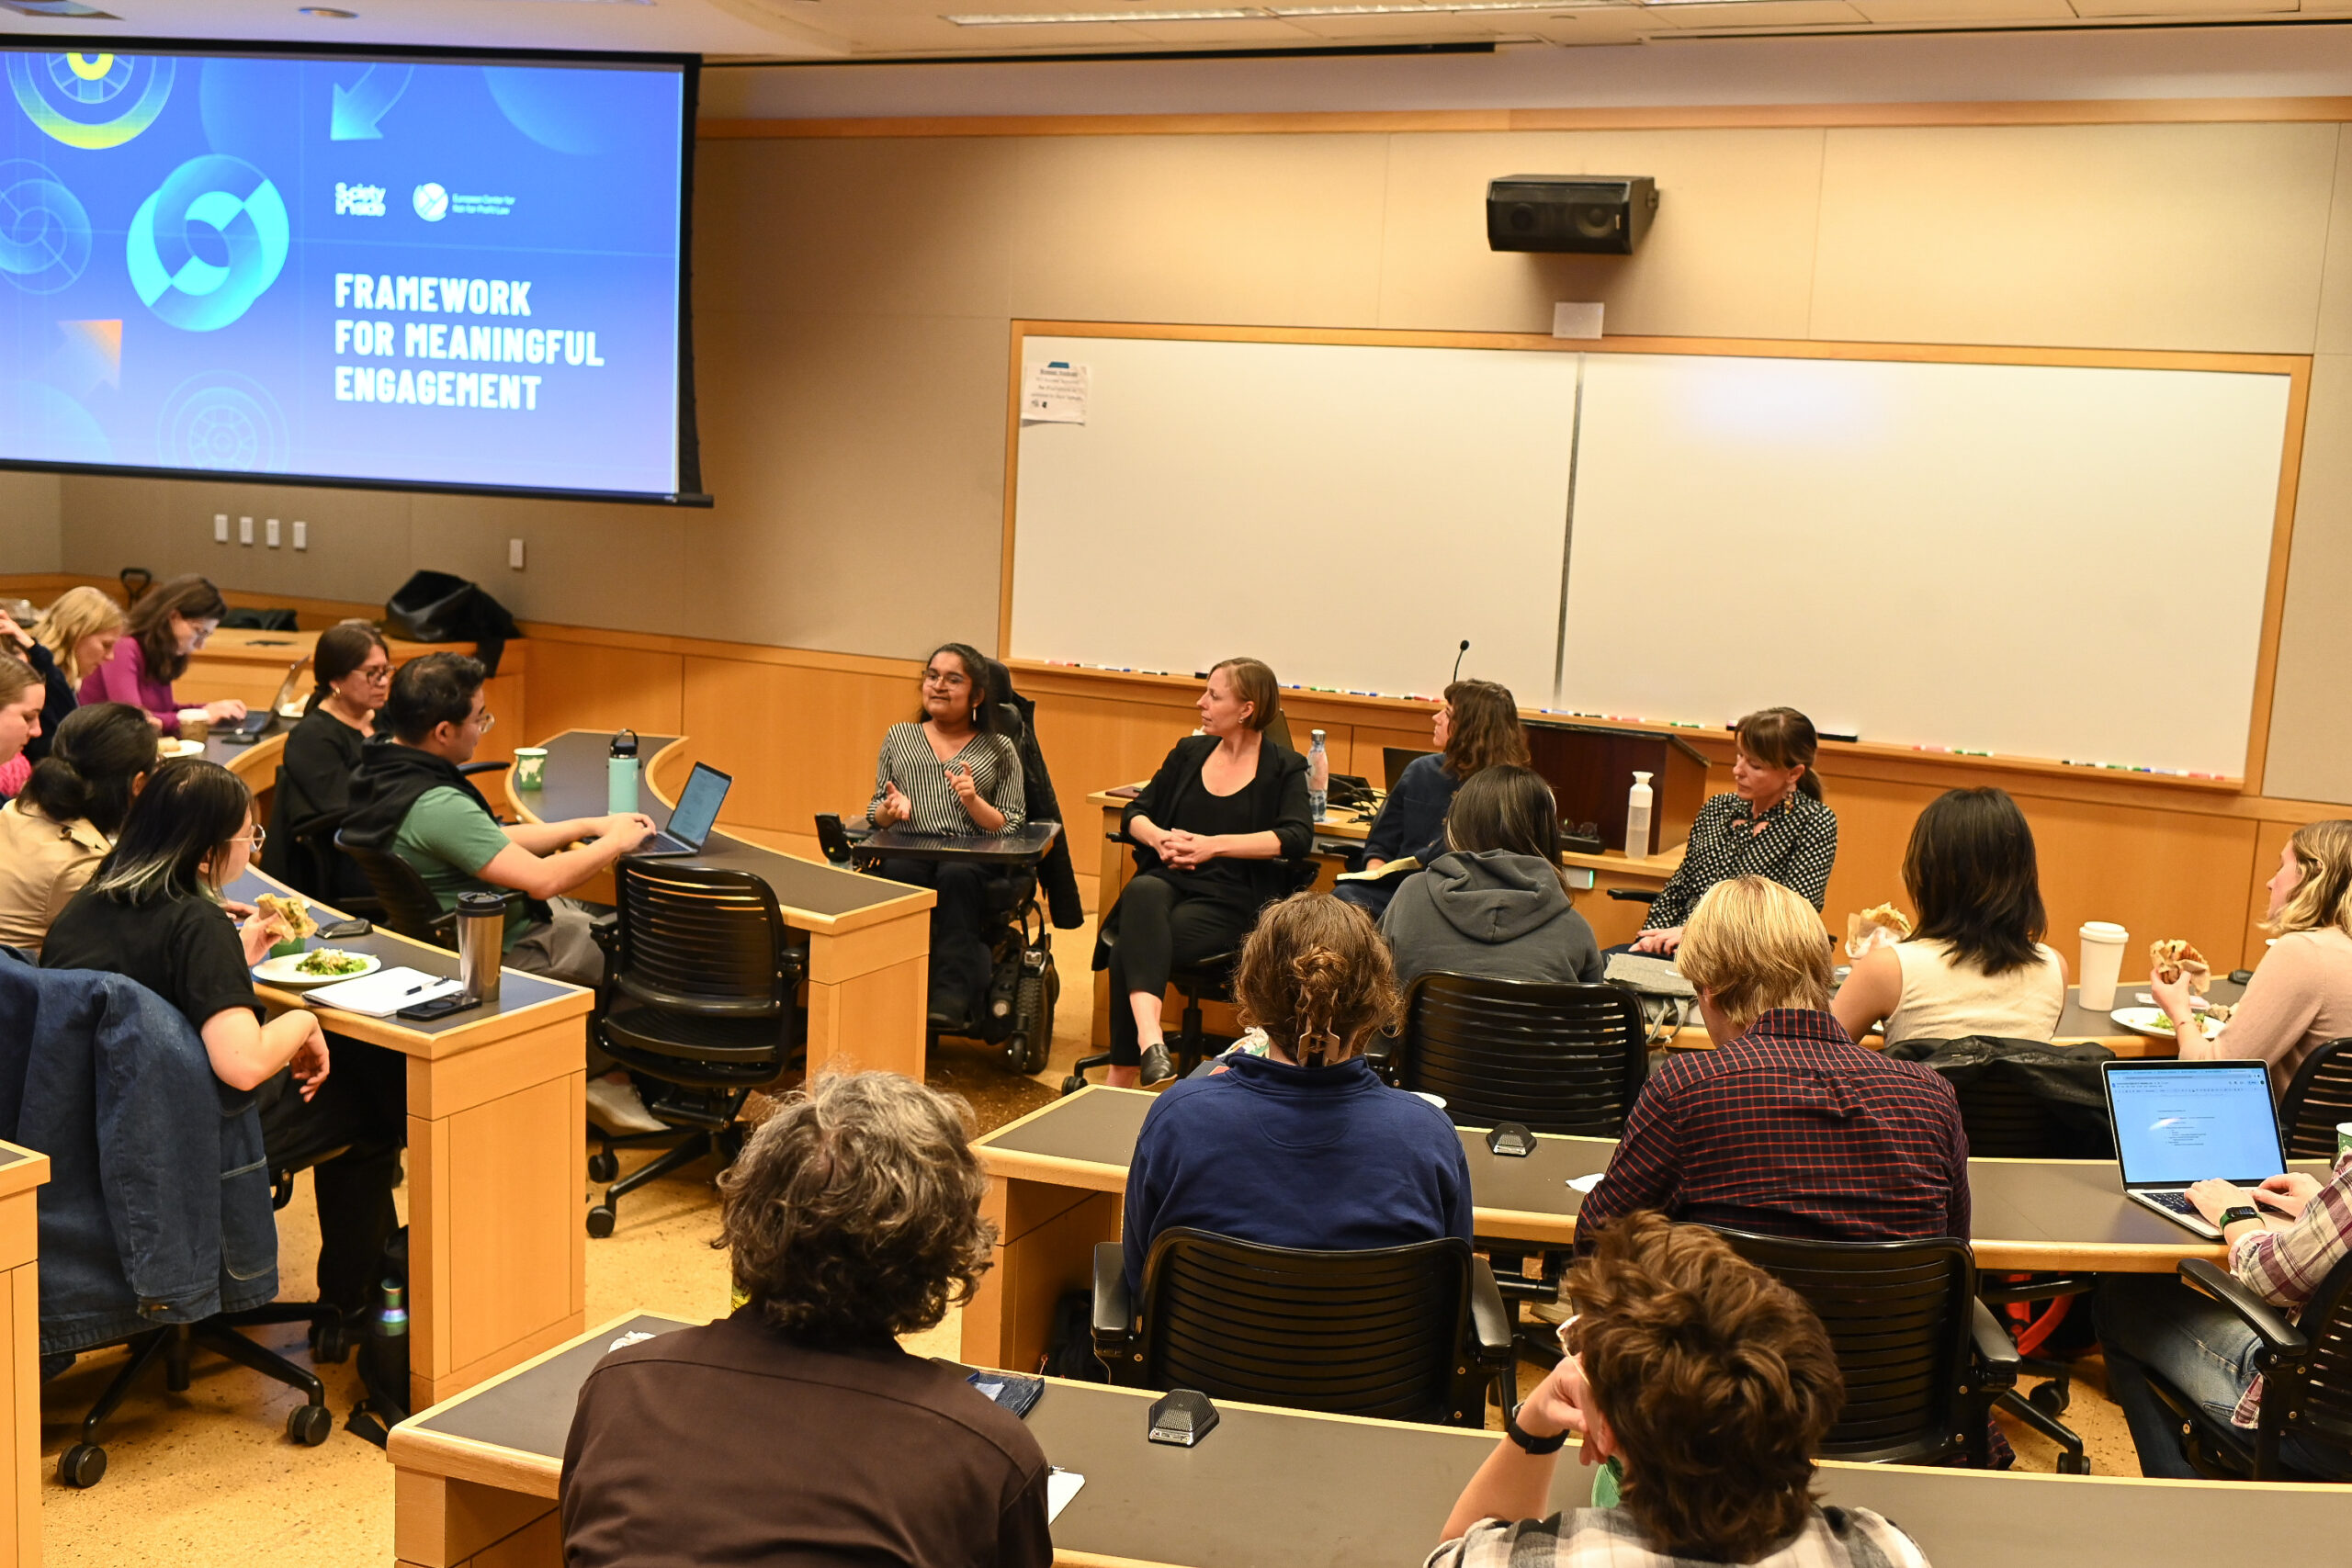 Four panelists speak to a crowd of students in a university room.